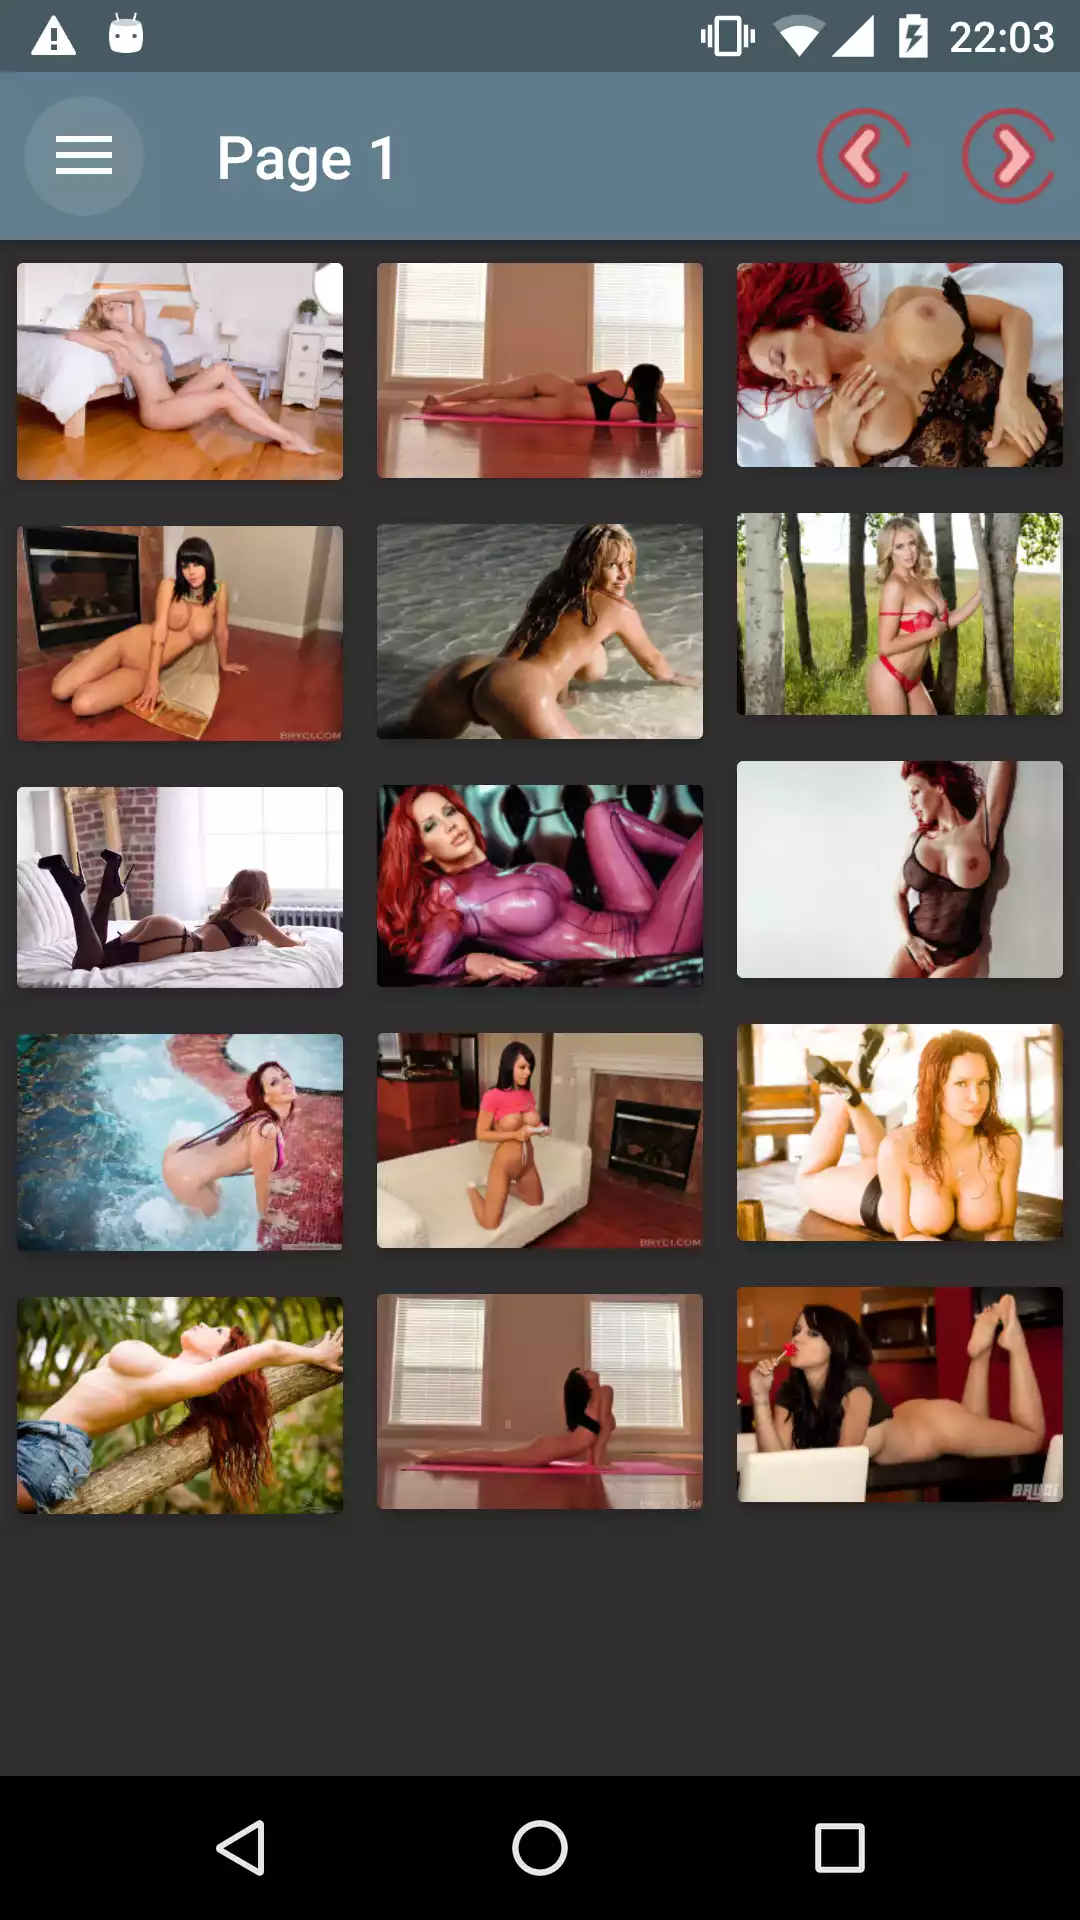 Hot Canadian Walls hot,watching,for,that,download,adult,app,have,wallpaper,photos,puzzle,apps,apk,pictures,lisa,galleries,porn,hentia,excuses,caprice,ann,pics,offline,sexy,wallpapers,hentai,free